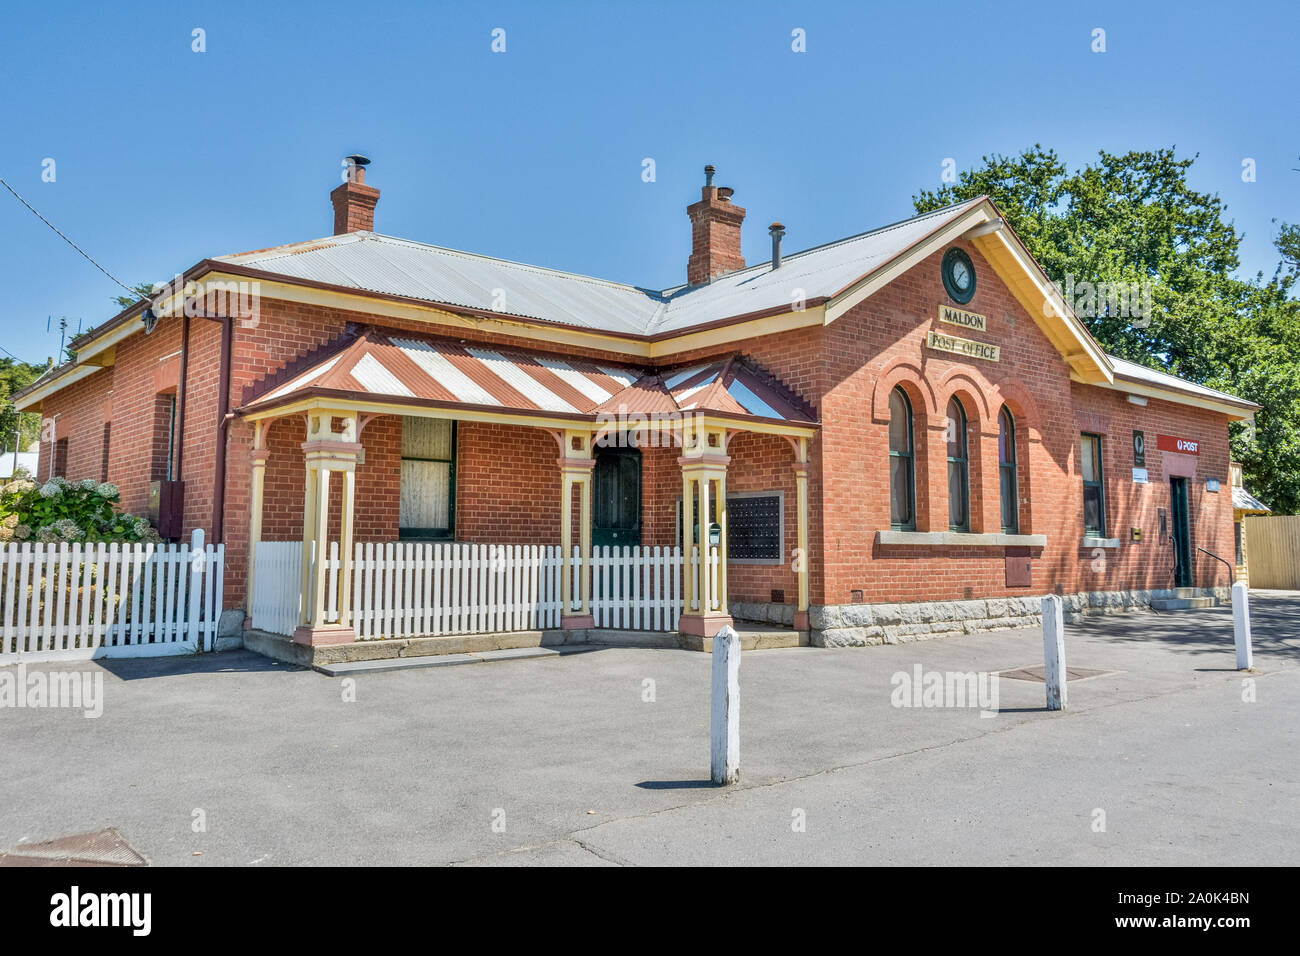 Maldon, Victoria, Australia - March 1, 2017. Exterior view of Maldon Post Office in Maldon, VIC. Built in 1870, this was the childhood home of local a Stock Photo